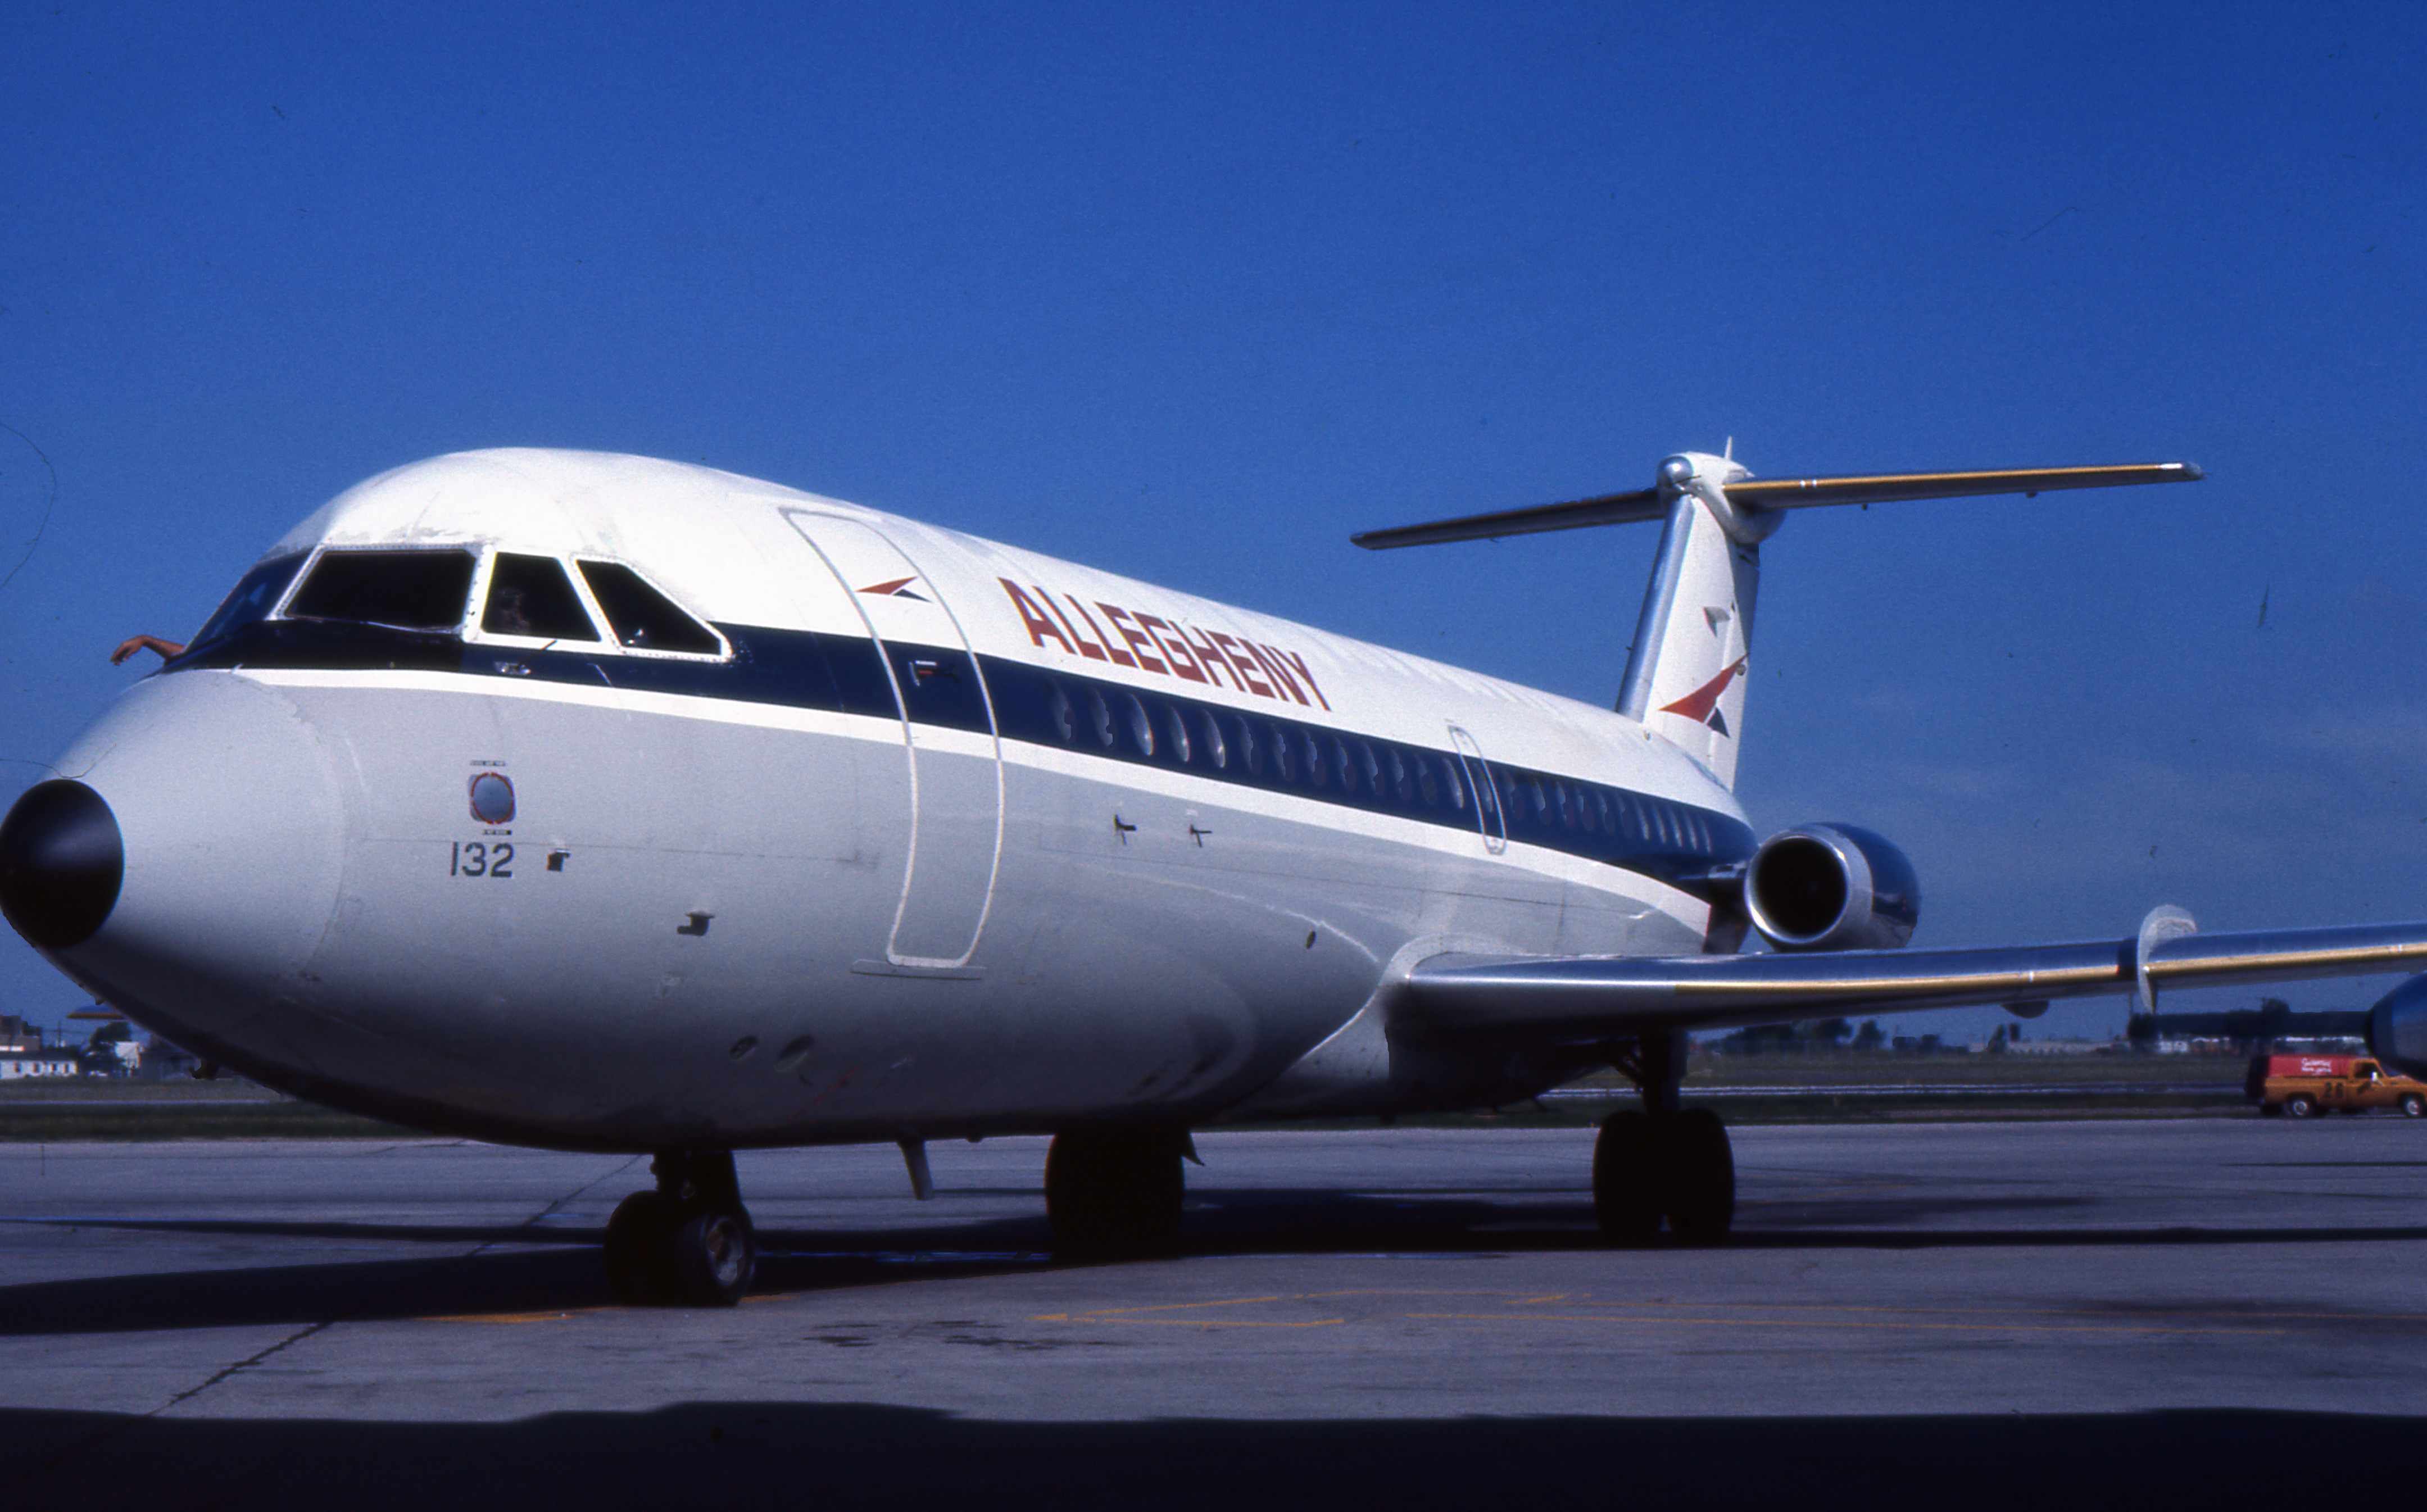 An Allegheny Airlines BAC 1-11 on an airport apron.